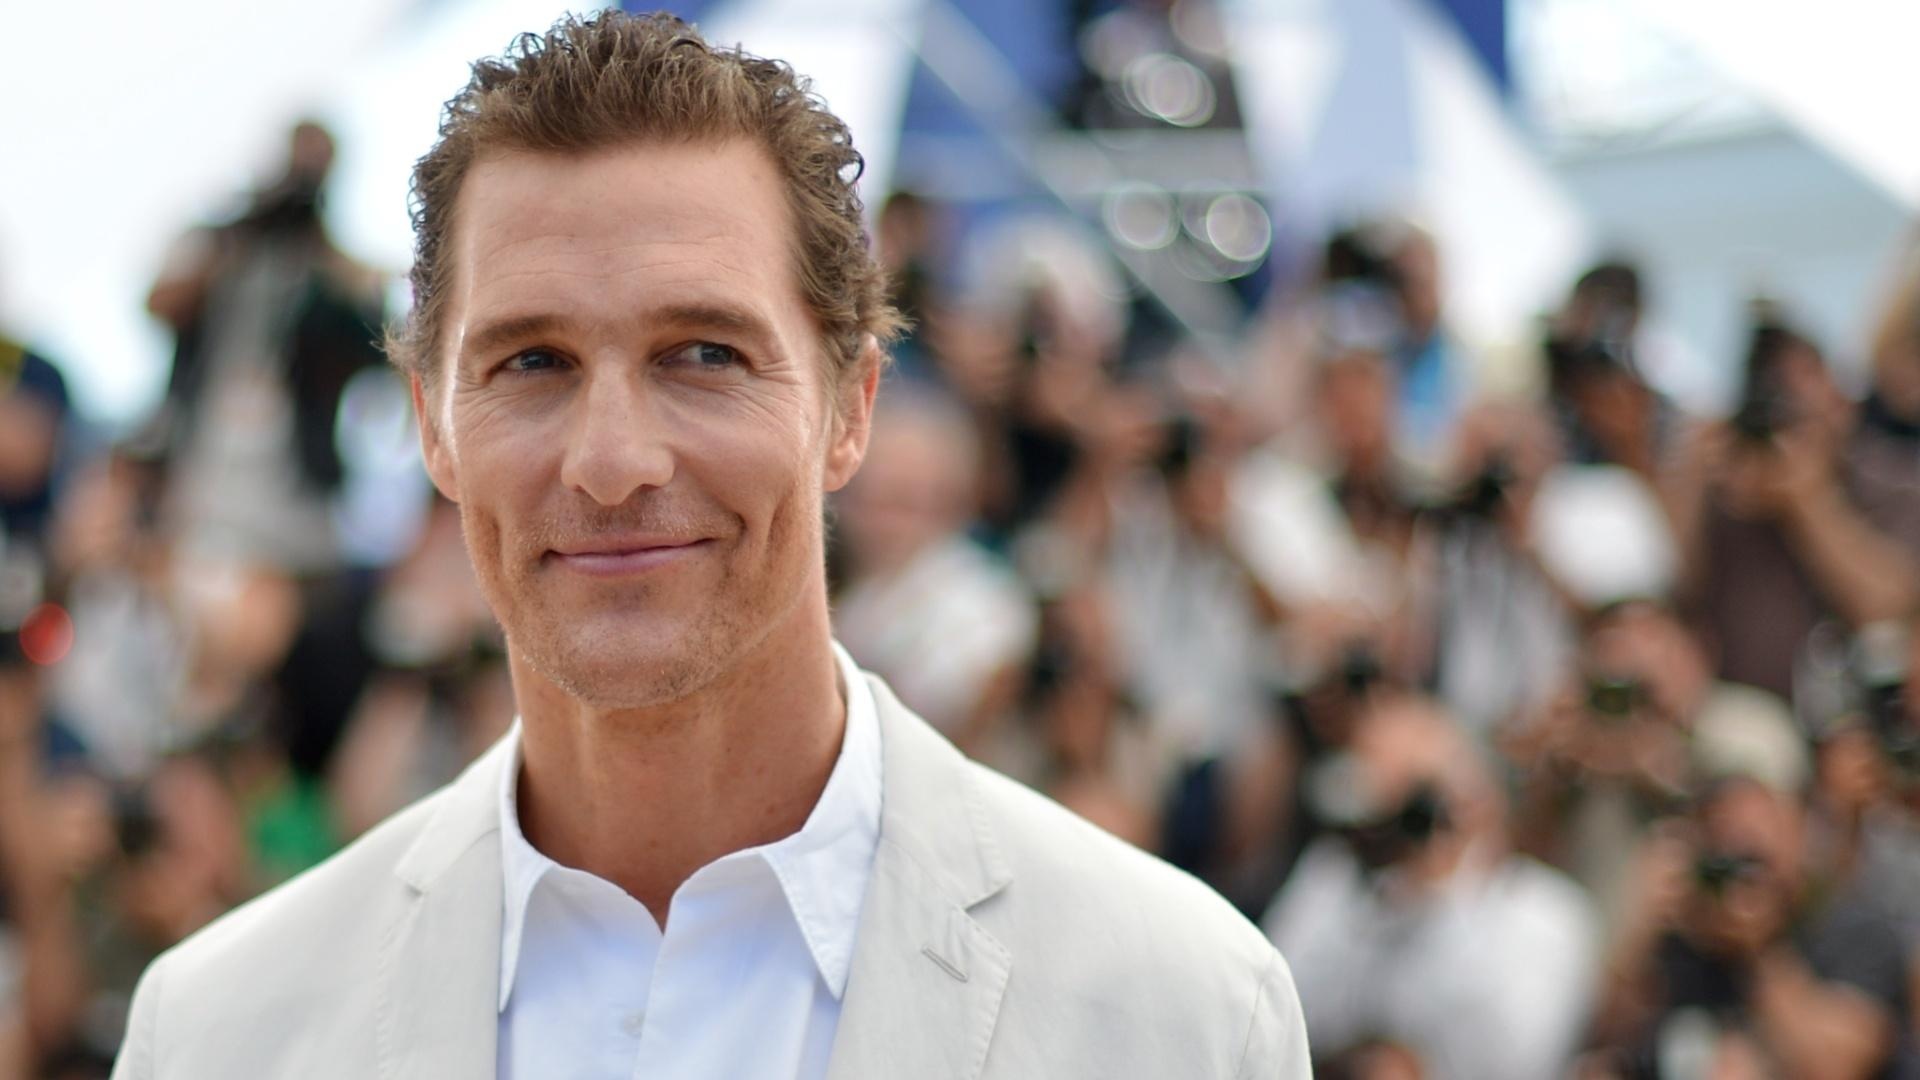 Matthew McConaughey: The Independent Spirit Award for Best Male Lead. 1920x1080 Full HD Wallpaper.